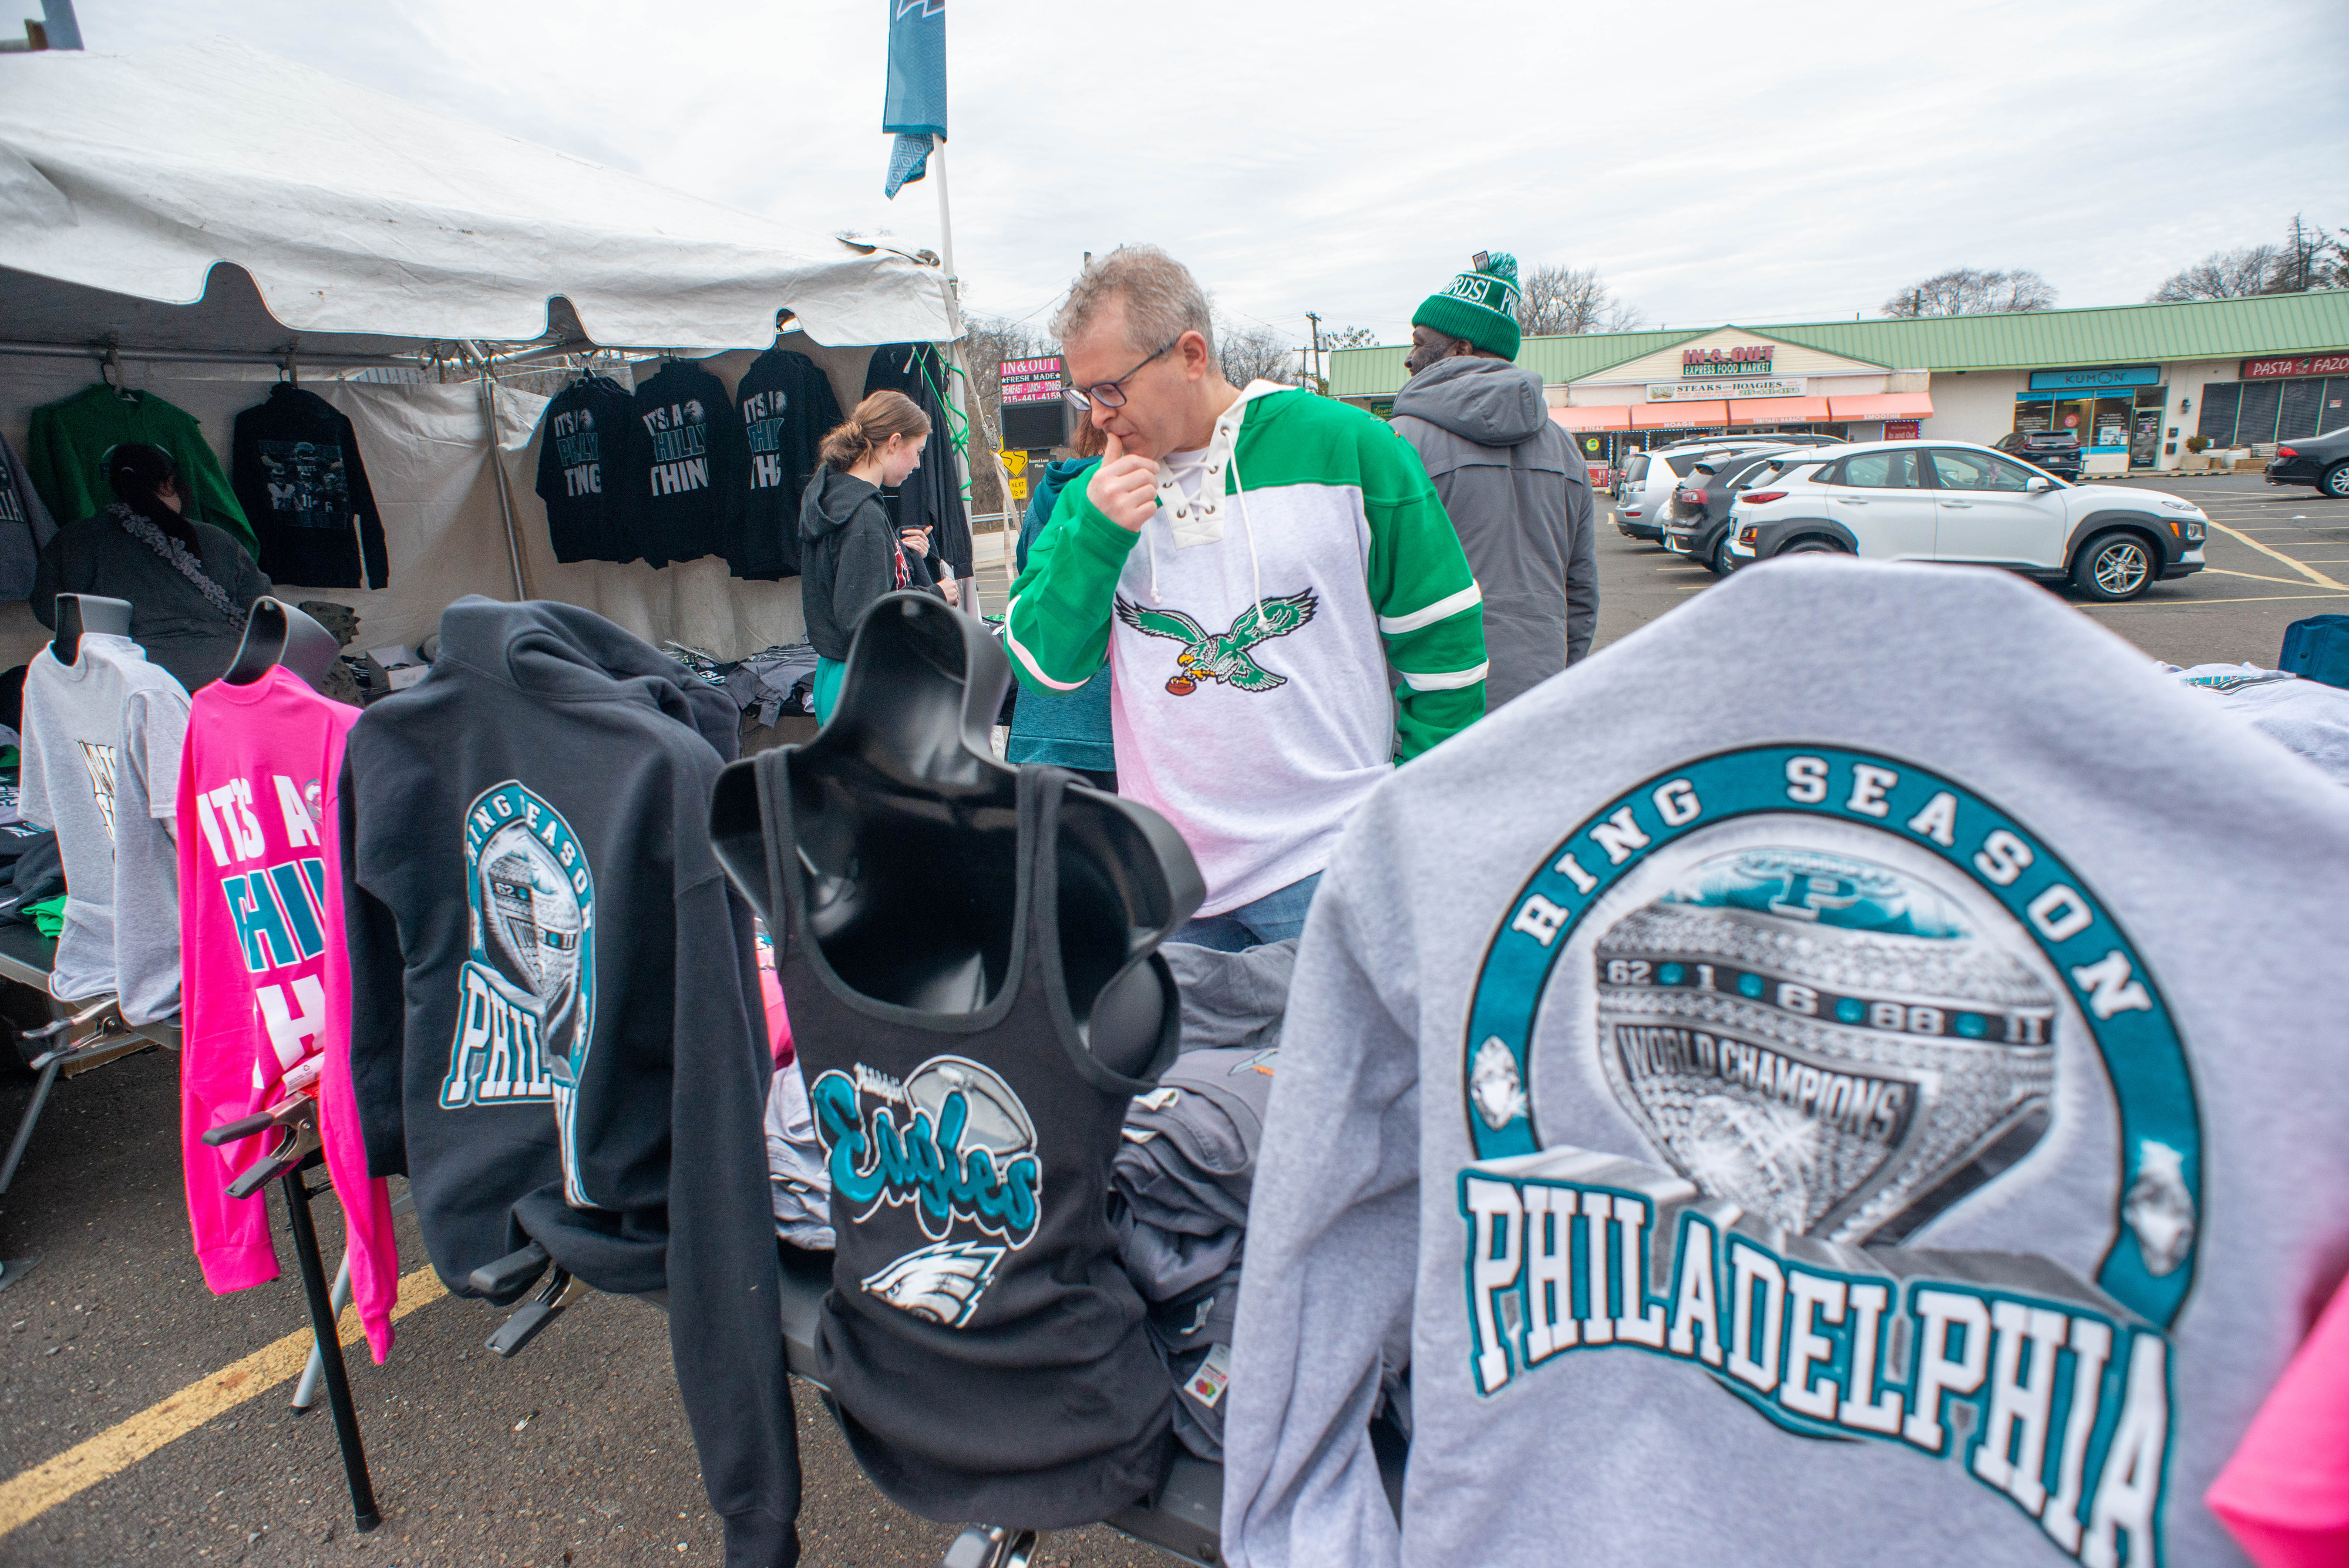 THE PRO SHOP AT LINCOLN FINANCIAL FIELD - One Lincoln Financial